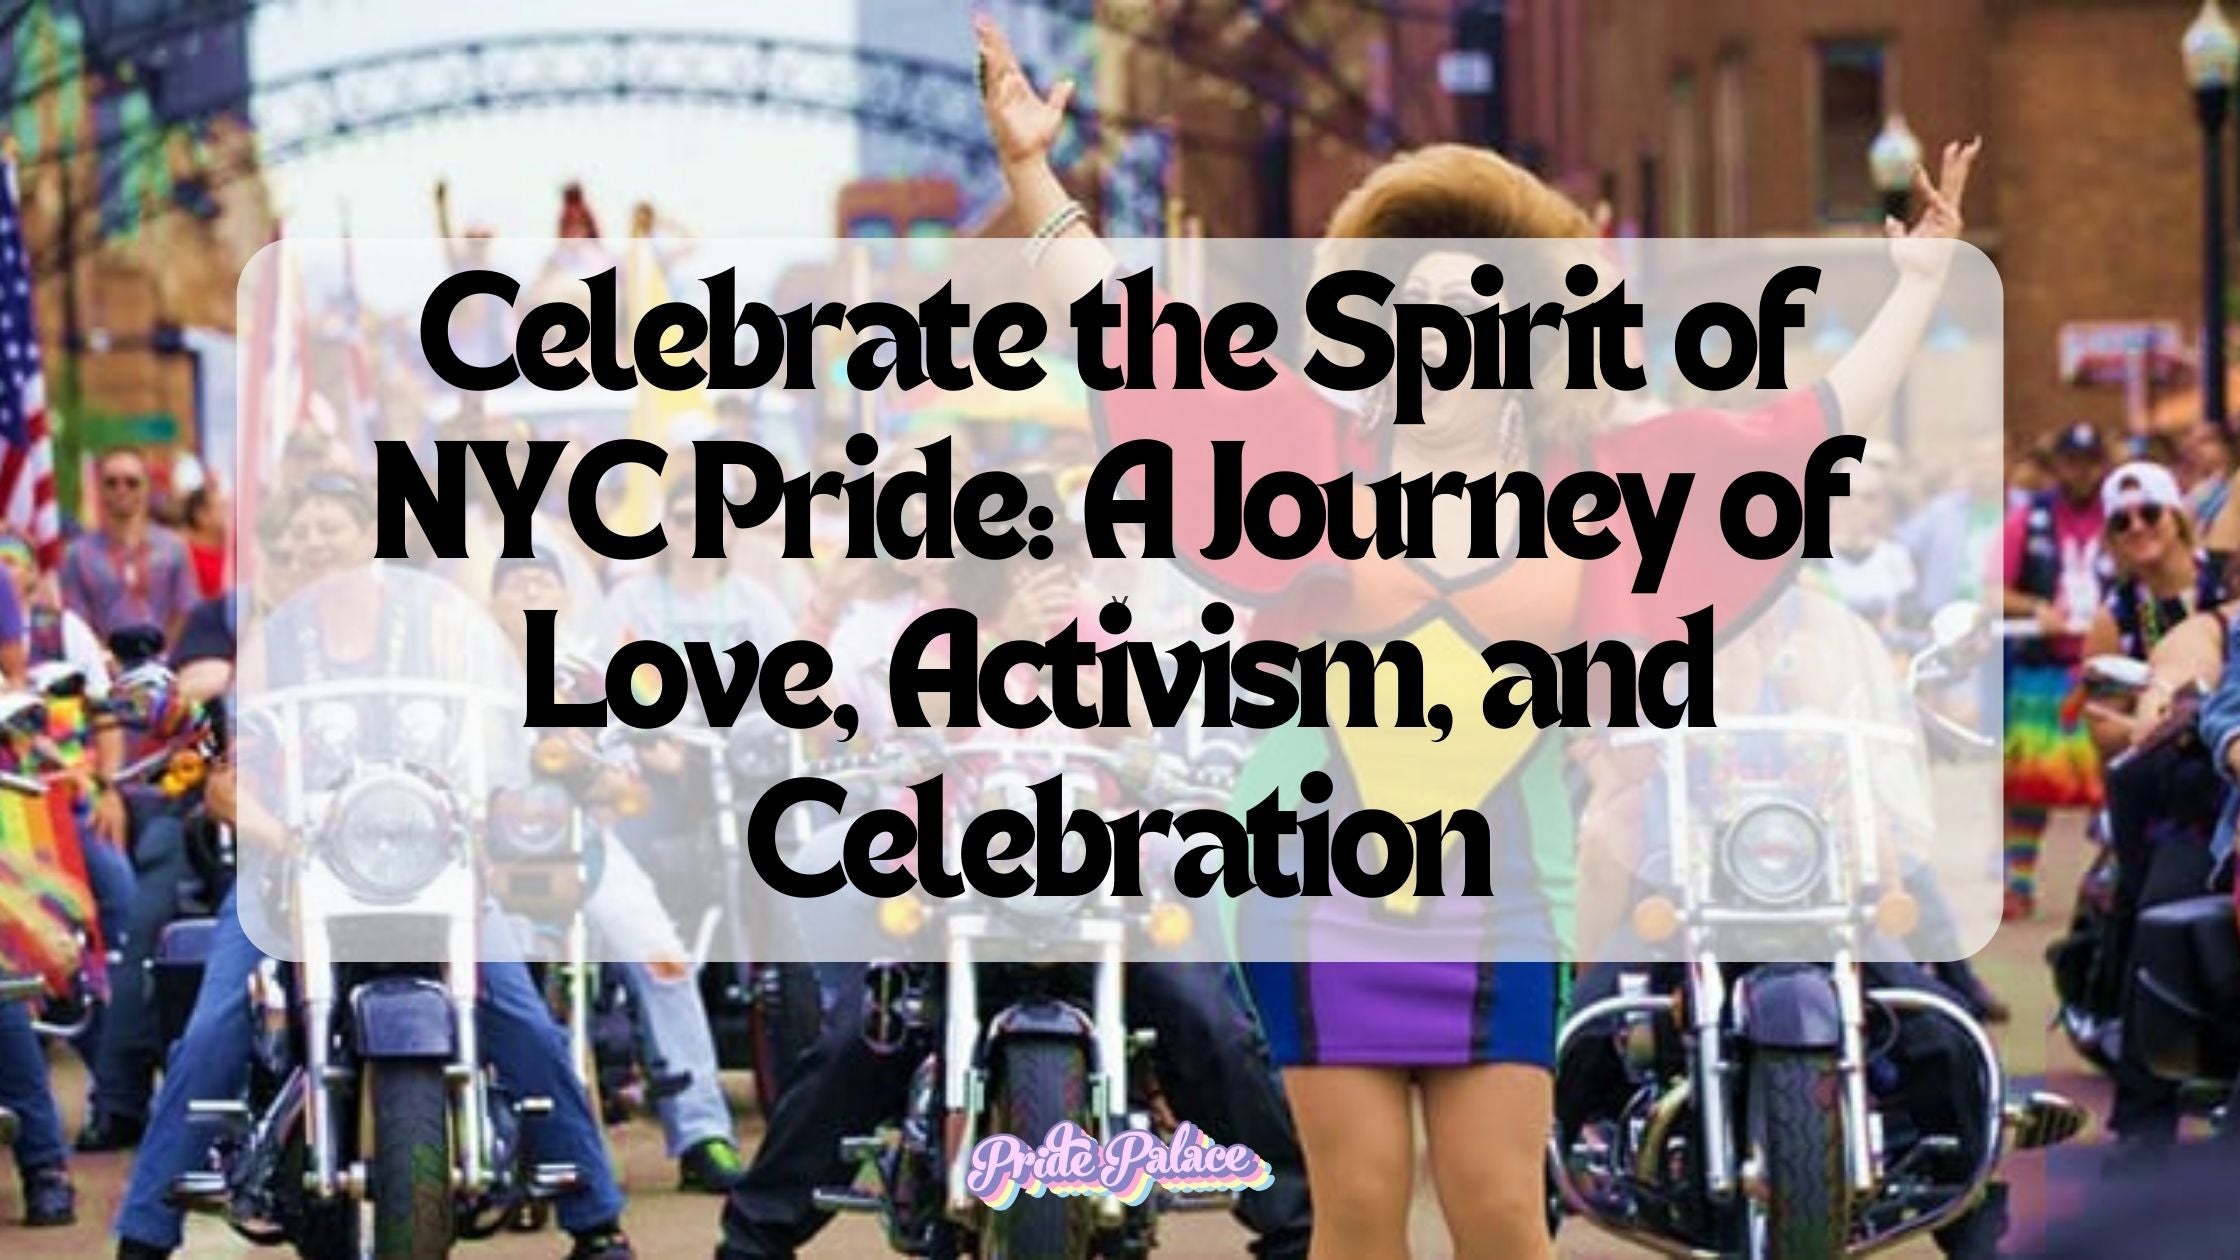 Celebrate the Spirit of NYC Pride: A Journey of Love, Activism, and Celebration